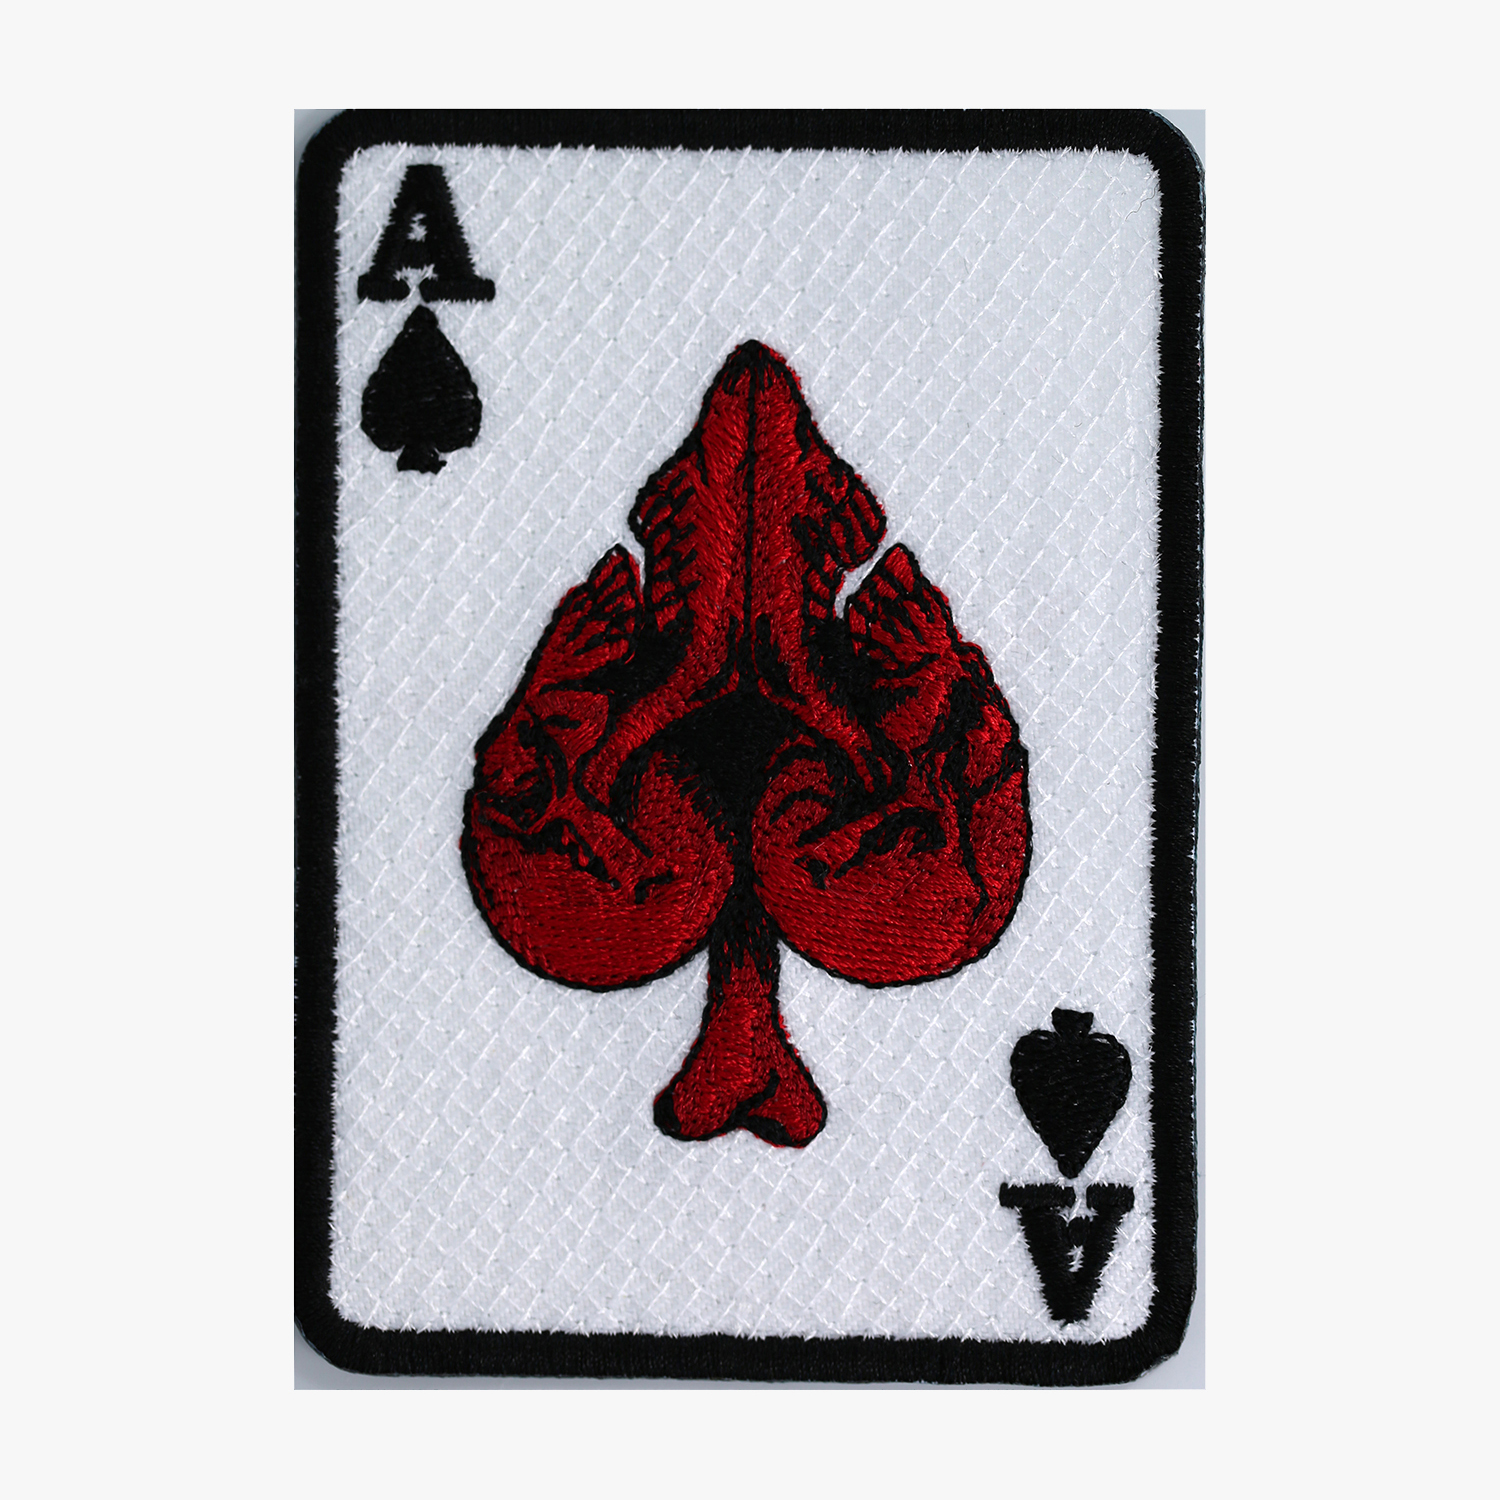 ACE of SPADE SKULL BIKER EMBROIDERY PATCH